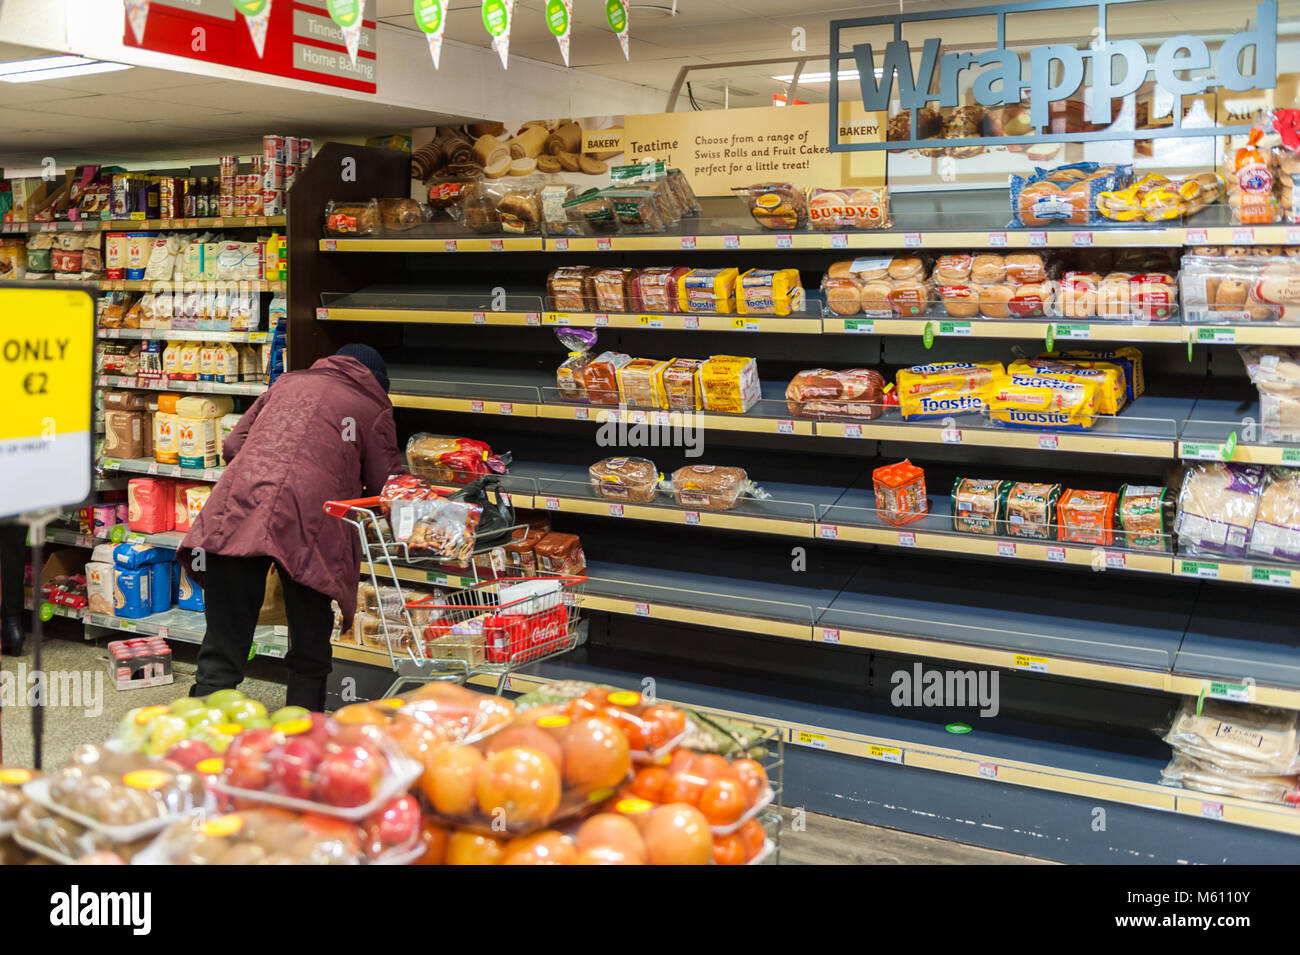 Dunmanway, County Cork, Ireland. 27th Feb, 2018. Ahead of the looming 'Beast from the East'/Storm Emma weather event, people have been panic buying supermarket goods. The bread shelves in Supervalu, Dunmanway were stripped today but more deliveries are expected tomorrow before the storm hits. Credit: Andy Gibson/Alamy Live News. Stock Photo